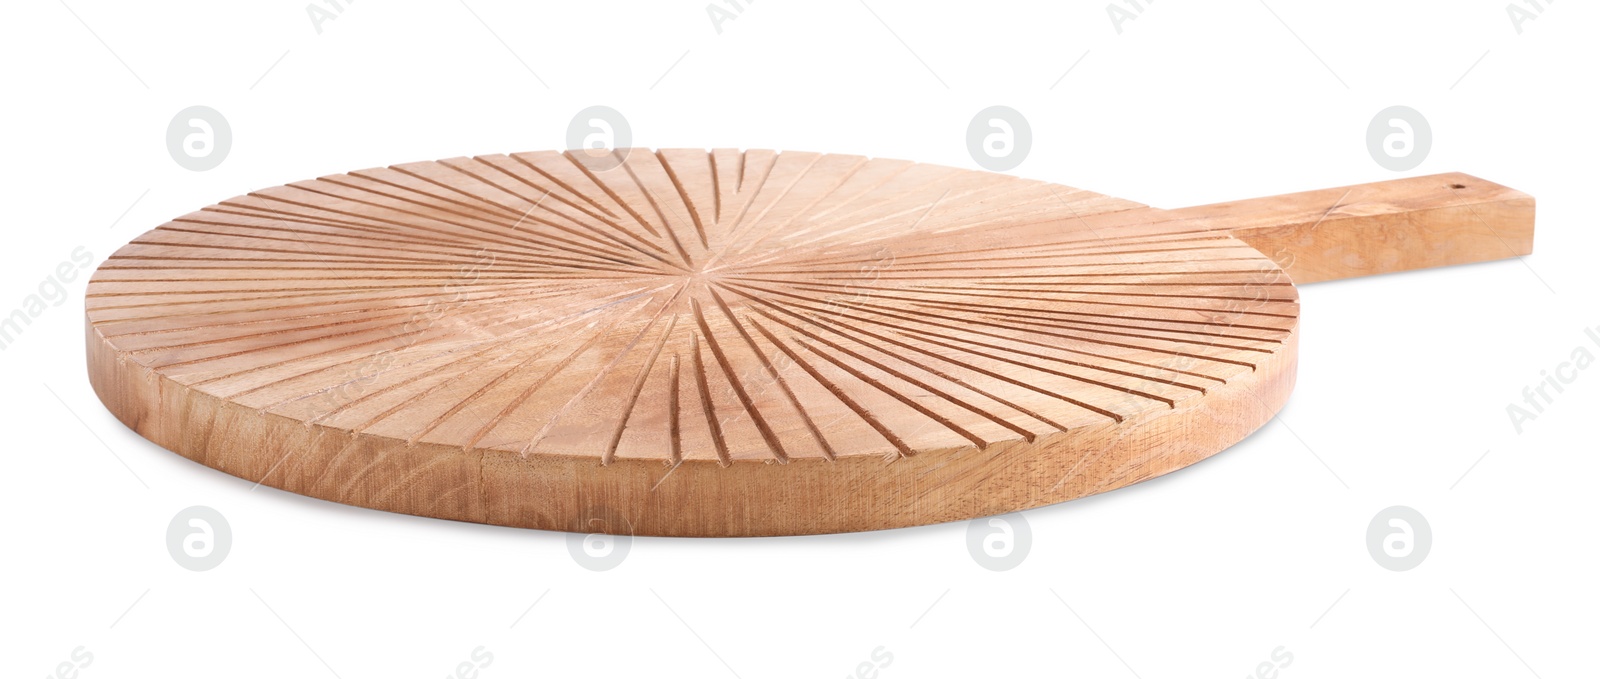 Photo of Wooden cutting board isolated on white. Cooking utensil